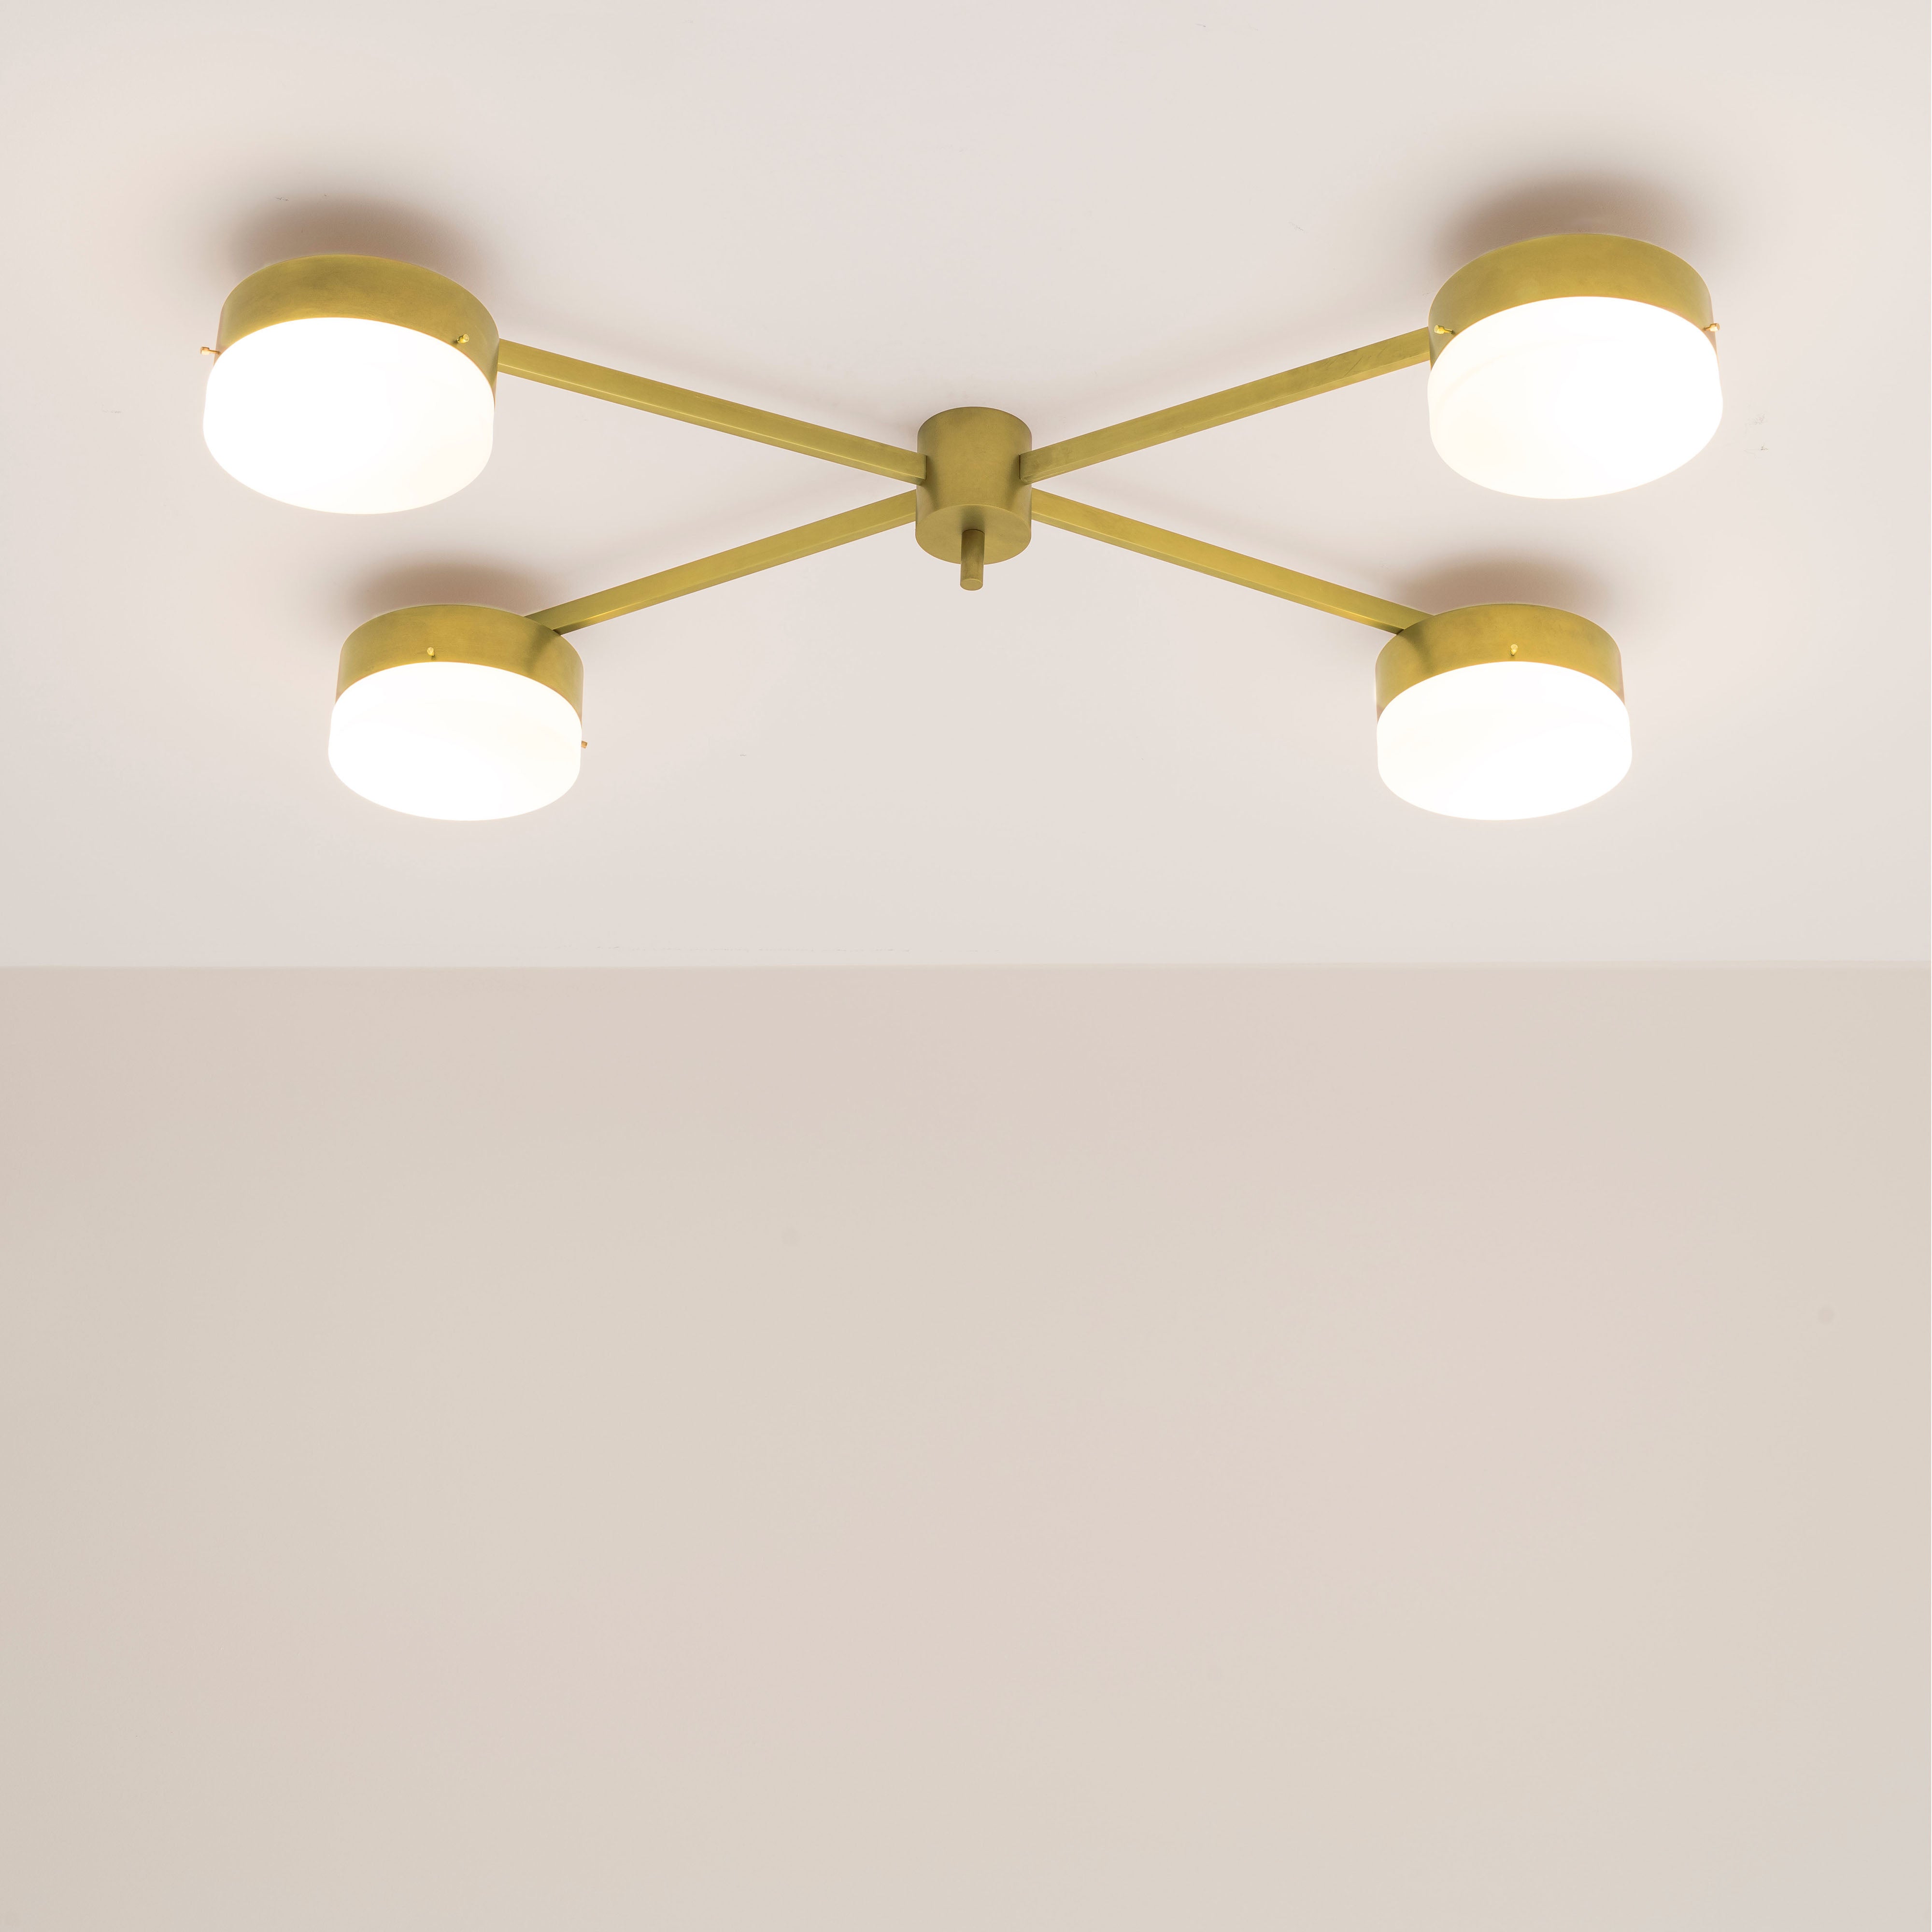 Aurora can be mounted both as a hanging and a wall lamp.